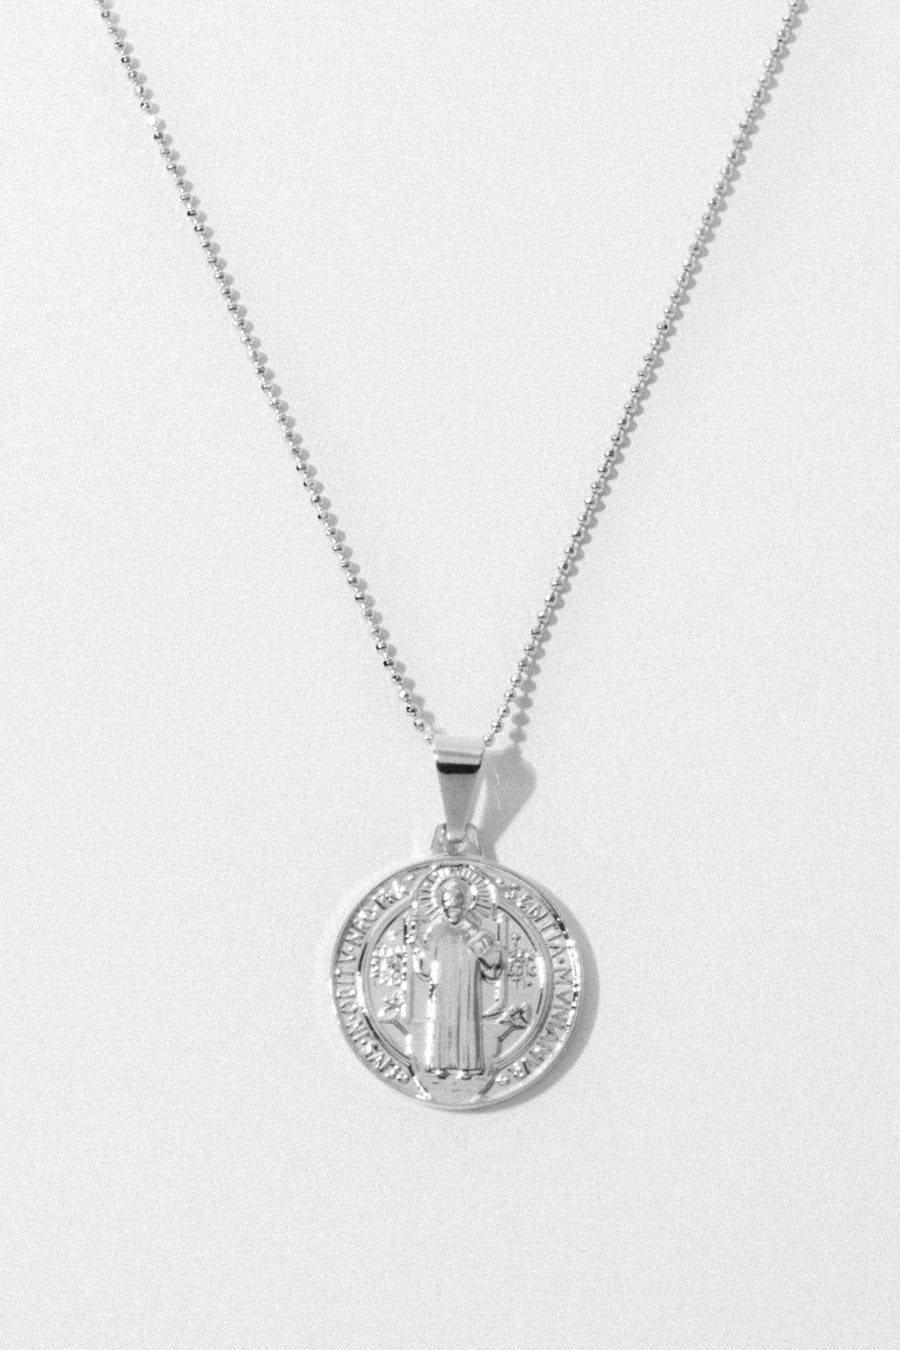 Dona Italia Jewelry Silver / 20 Inches Holy Traveler Necklace